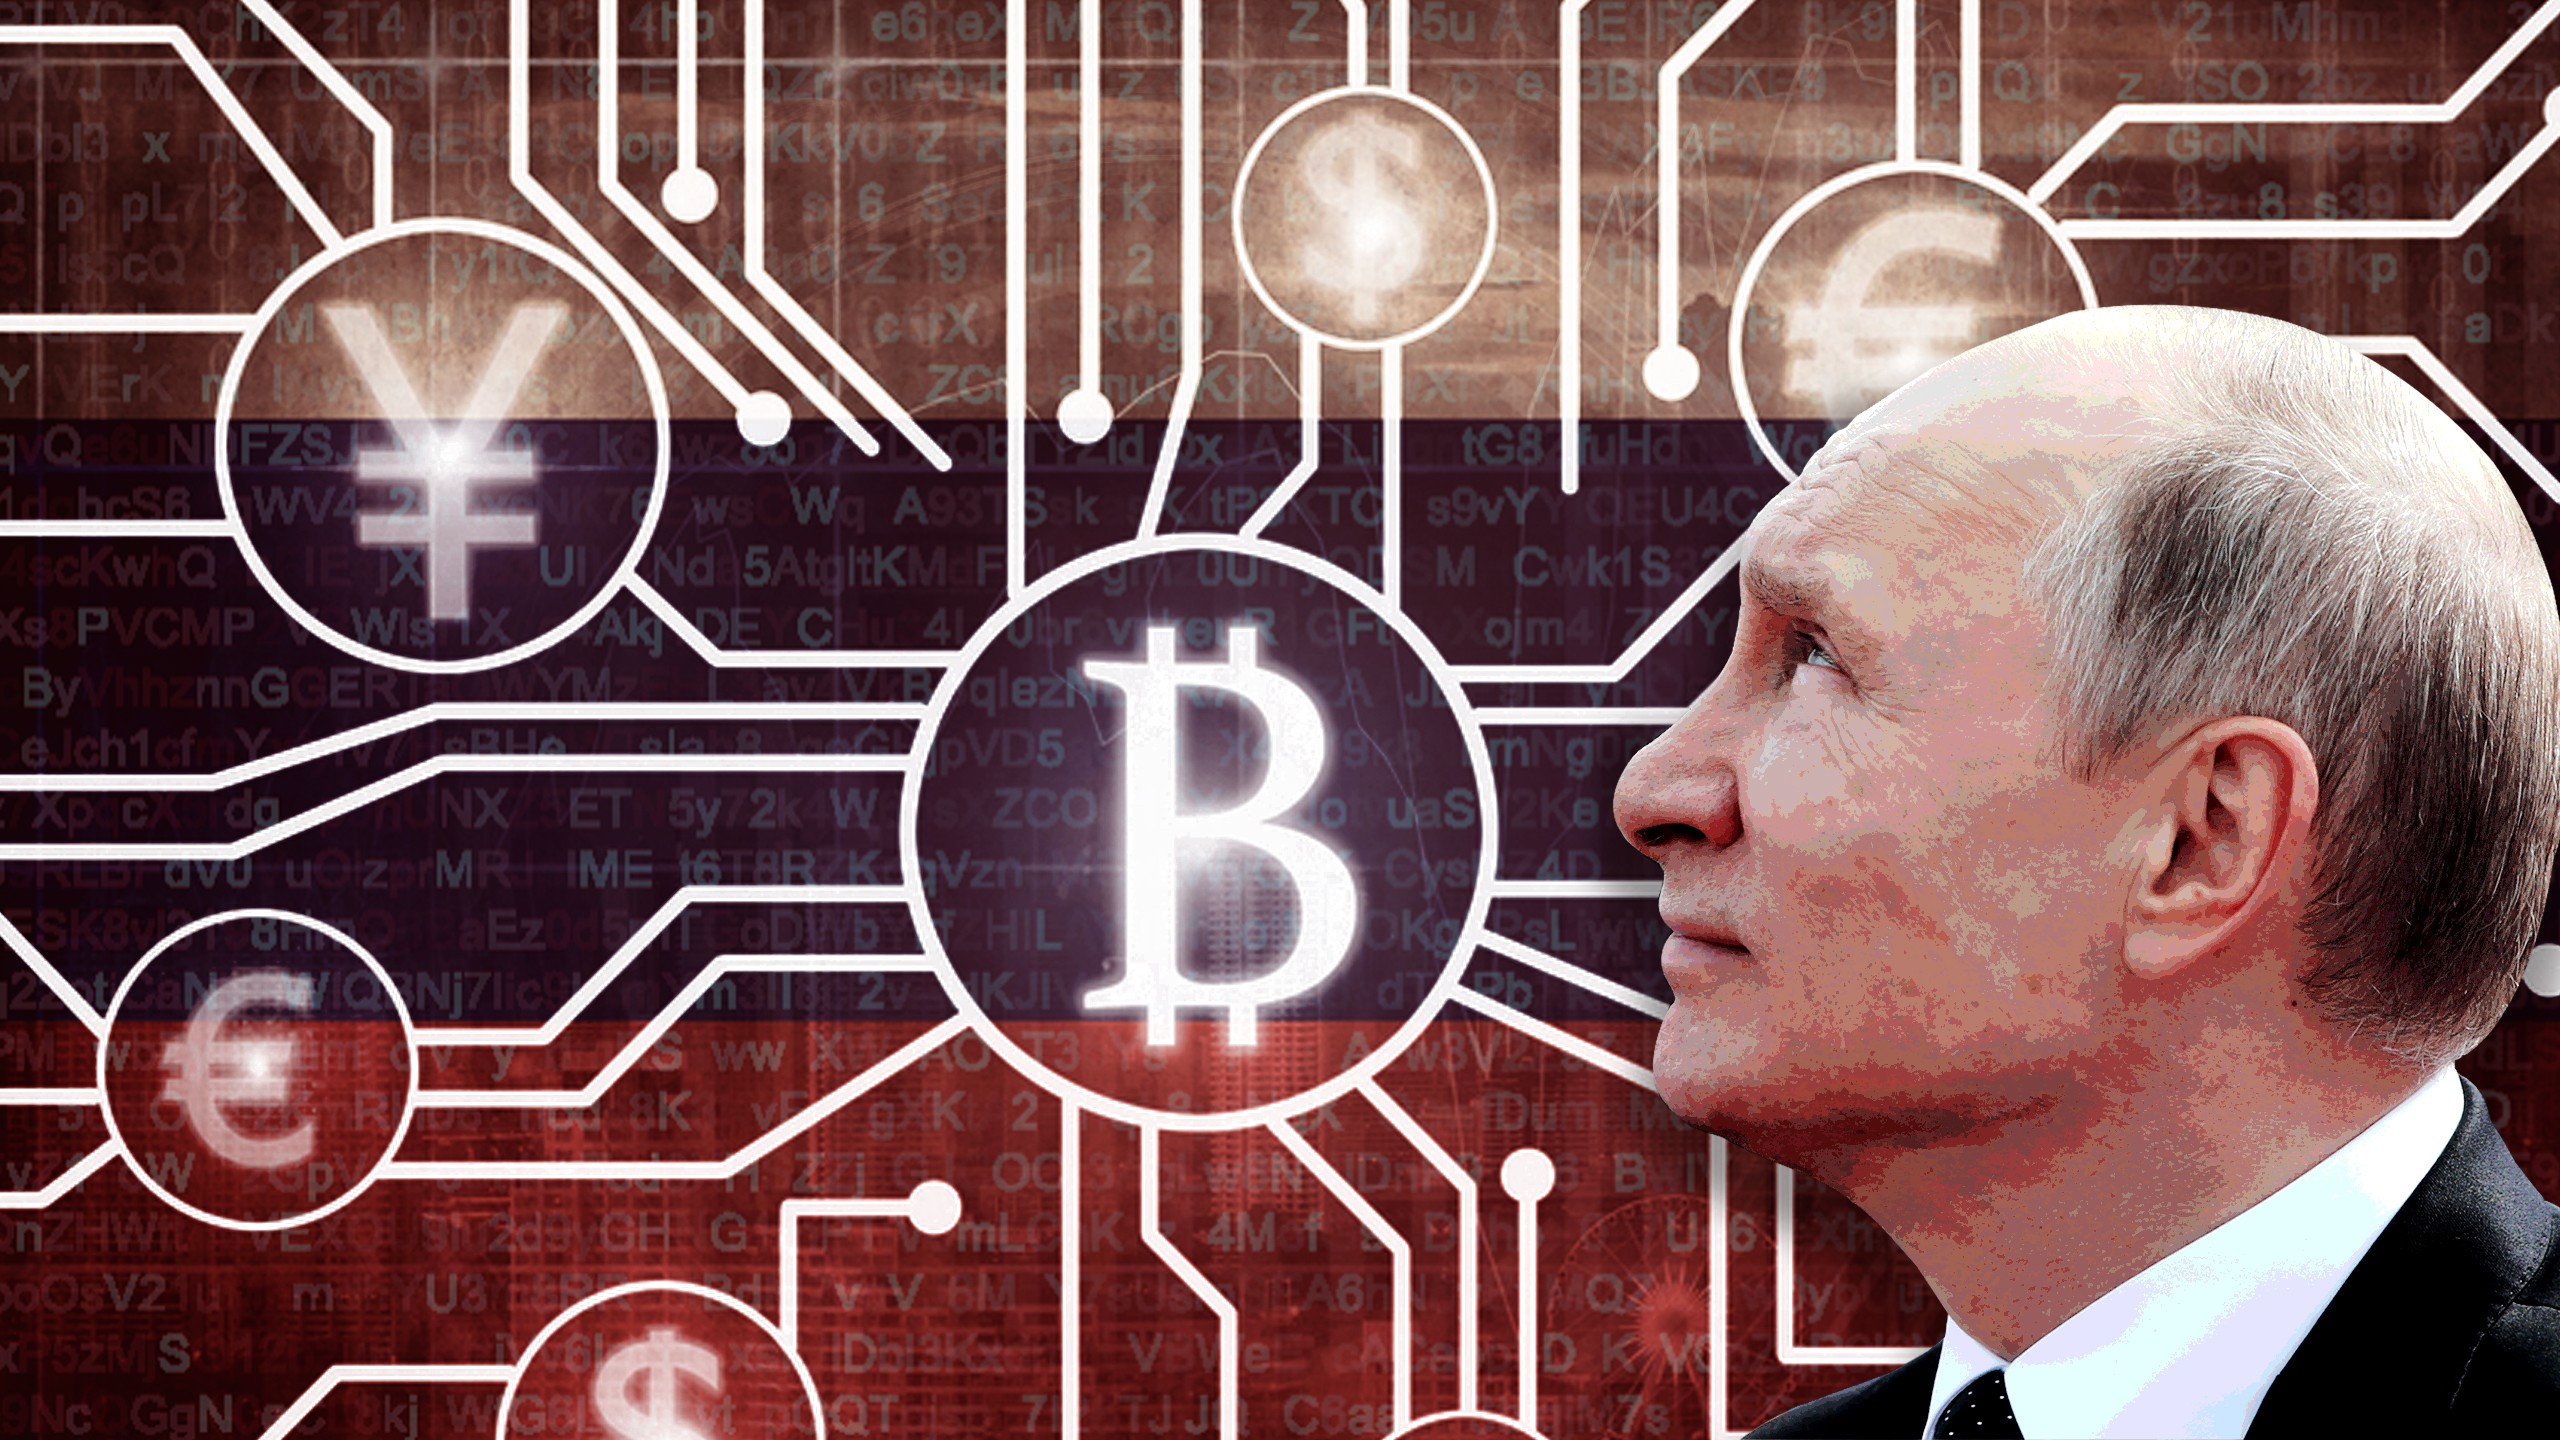 http://www.thedailybeast.com/why-is-the-kremlin-suddenly-obsessed-with-cryptocurrencies